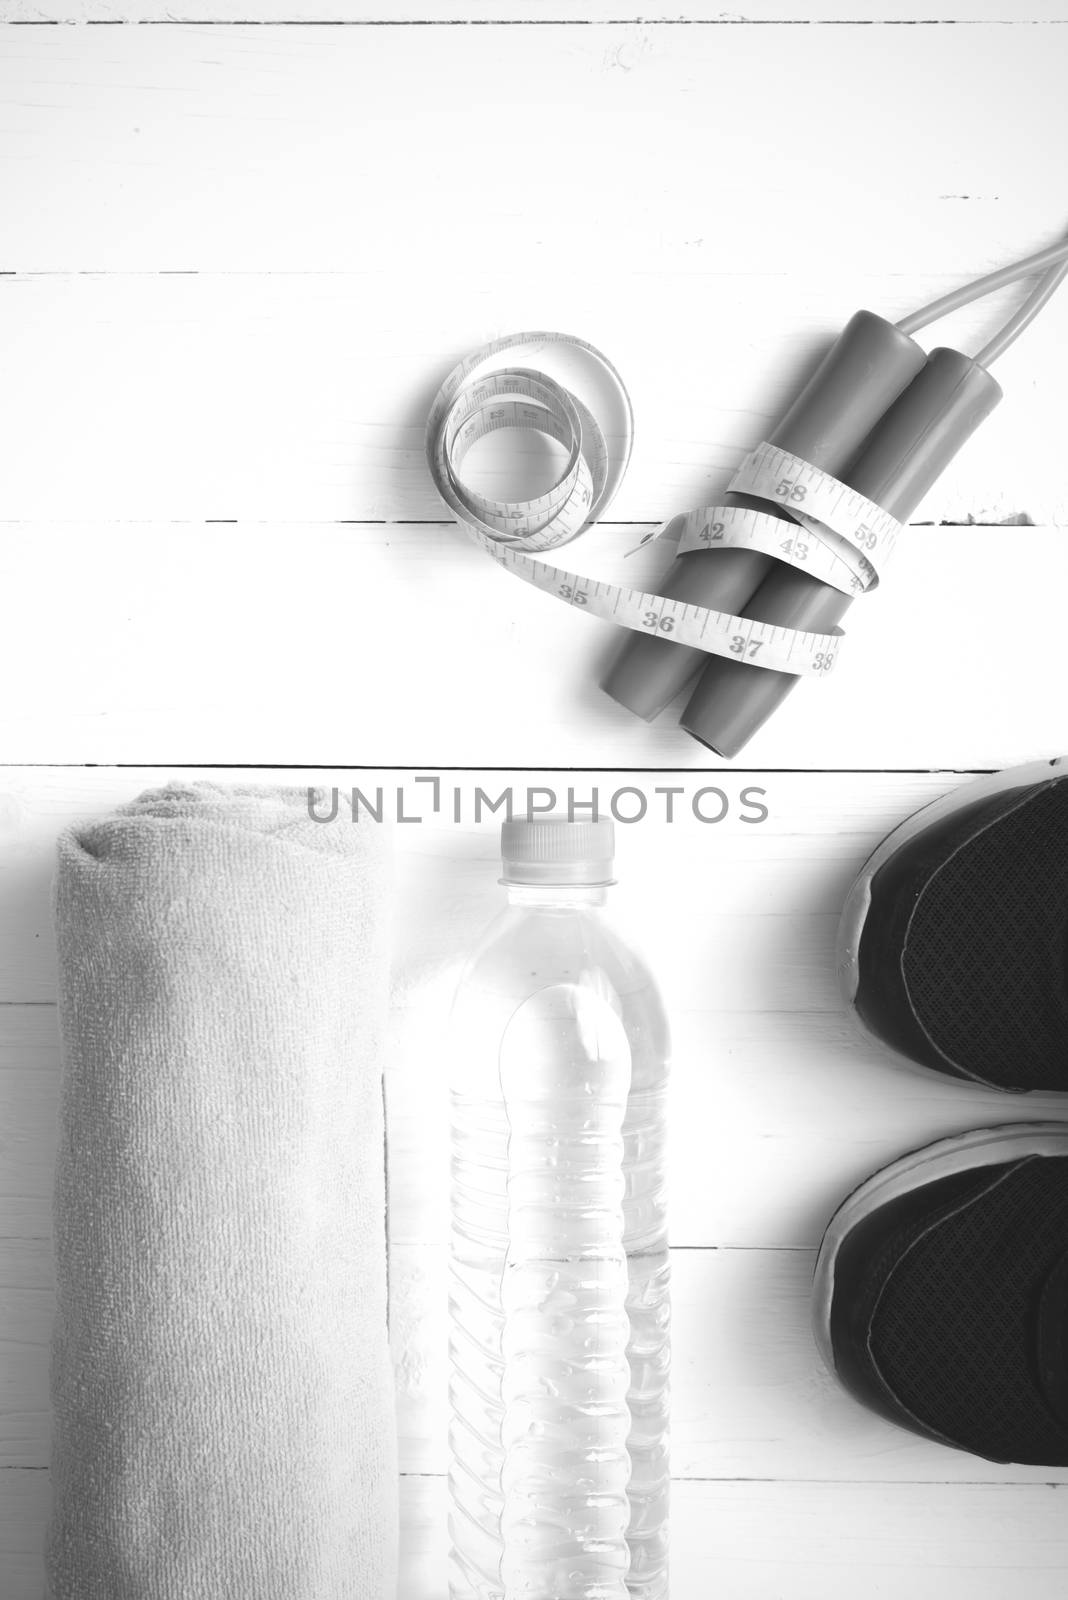 fitness equipment : running shoes,towel,jumping rope,water bottle and measuring tape on white wood table black and white color tone style